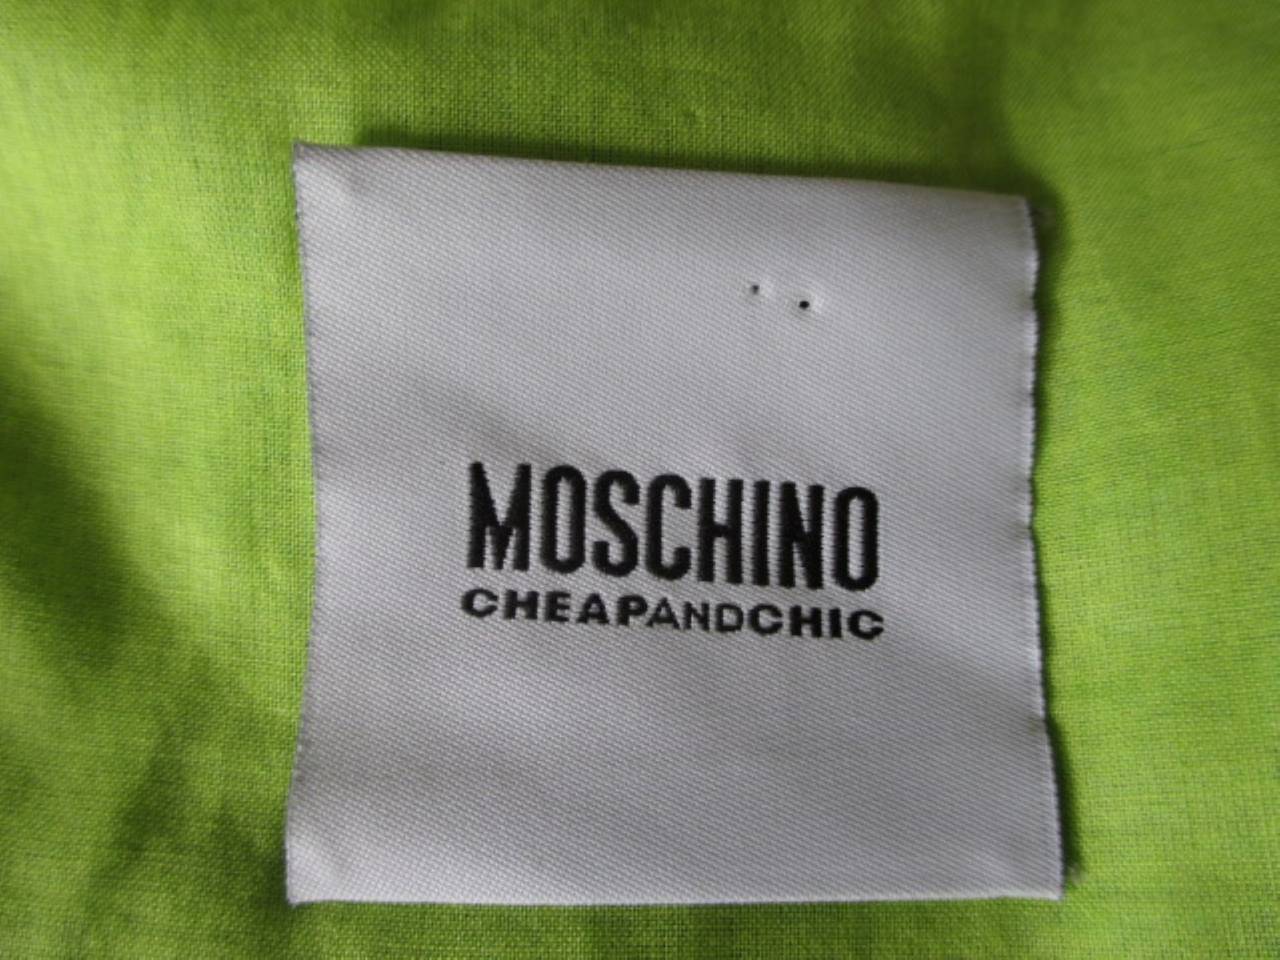 Moschino jacket from the collection Cheap & Chic with purple, lime green and blue stones embroidered.
color jacket green/blue and the lining is lime green
with press buttons closures
Material : cotton
Size: US 12, GB 14, F 42, D 42, I 46

Please